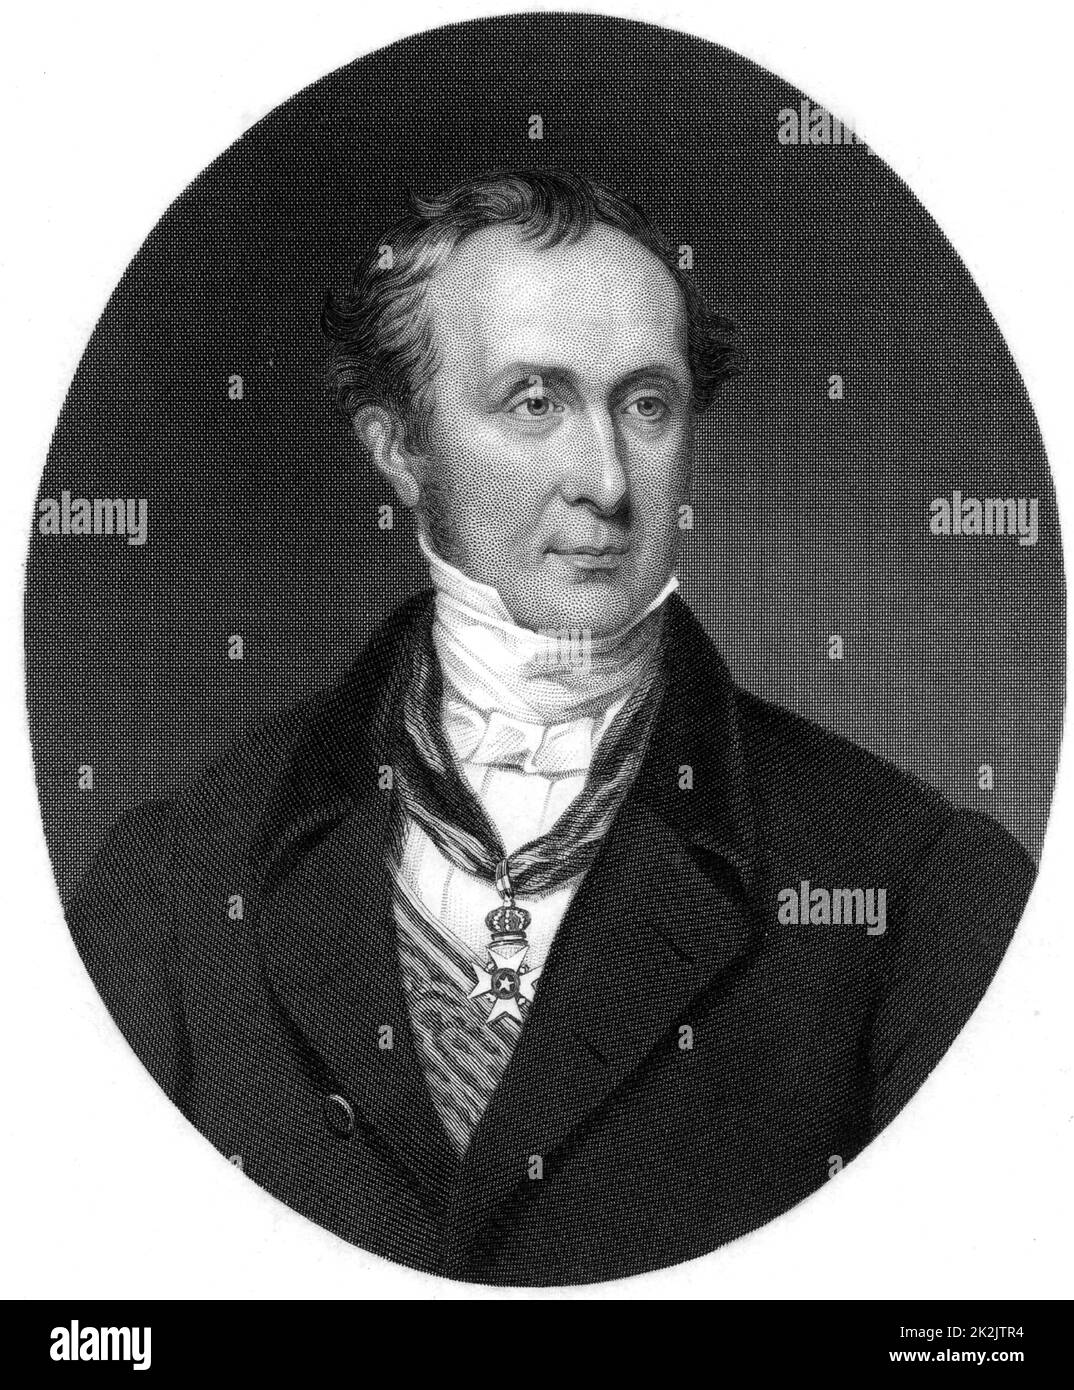 Roderick Impey Murchison 1792-1871) Scottish born British geologist. Defined Silurian system, 1835, Permian system, c1845, and in co-operation with Adam Sedgwick (1785-1873), the Devonian system. Fellow of the Royal Society, 1826. Director-general of the Geological Survey, 1855. President of the Royal Geographical Society, 1843. From 'Life of Sir Roderick I. Murchison' by Archibald Geikie (London, 1875). Engraving. Stock Photo